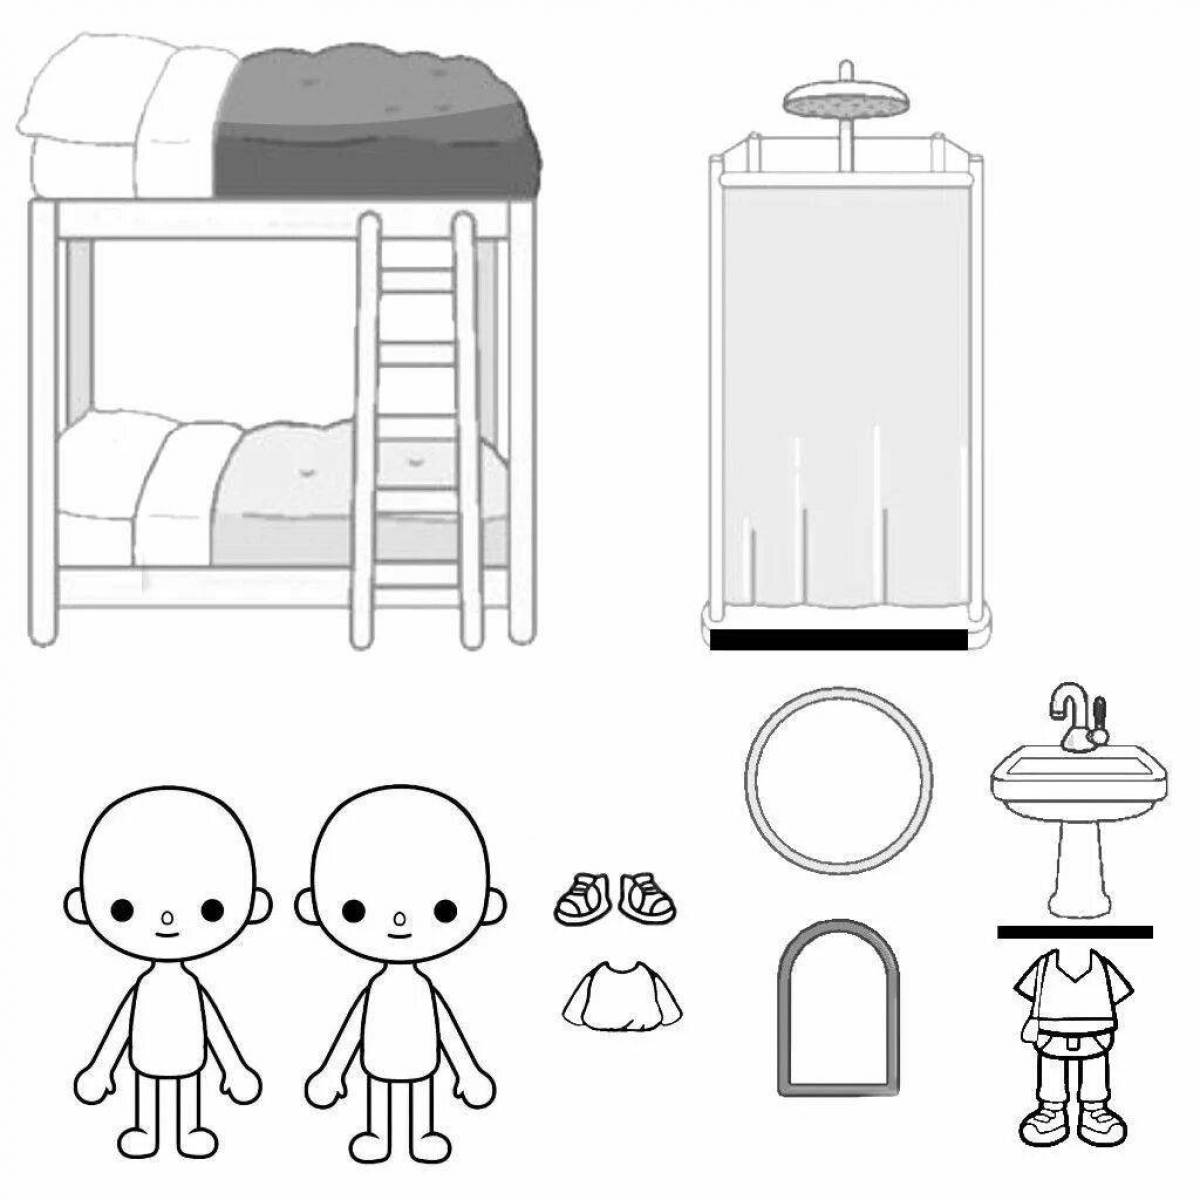 Ami's quirky furniture house coloring page